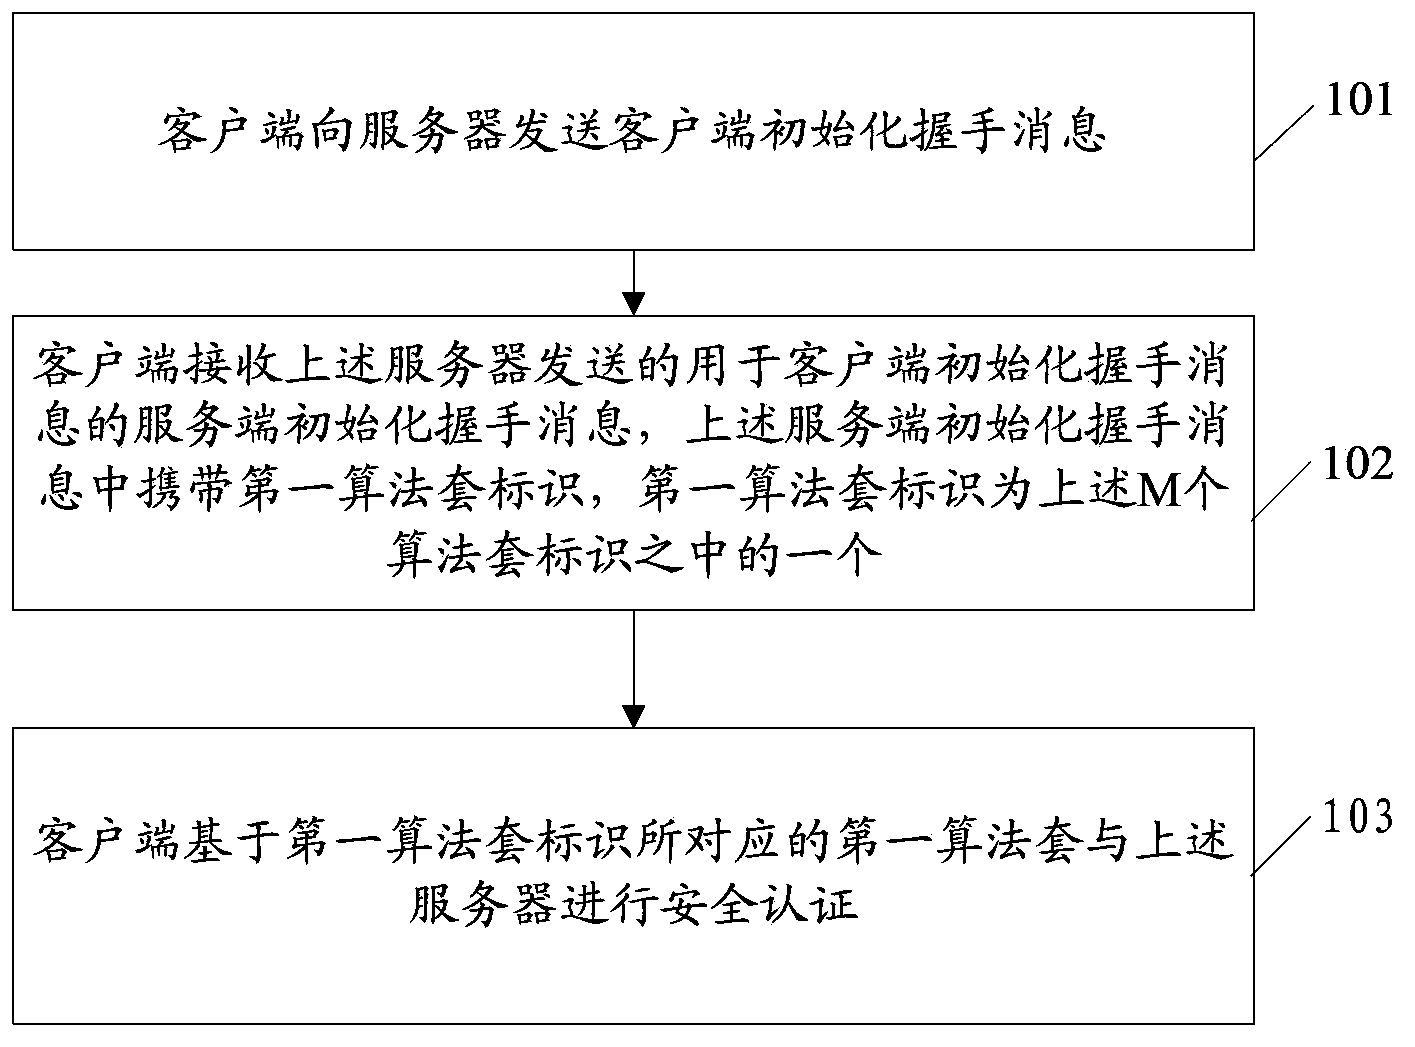 Security authentication method, equipment and system based on transport layer security protocol